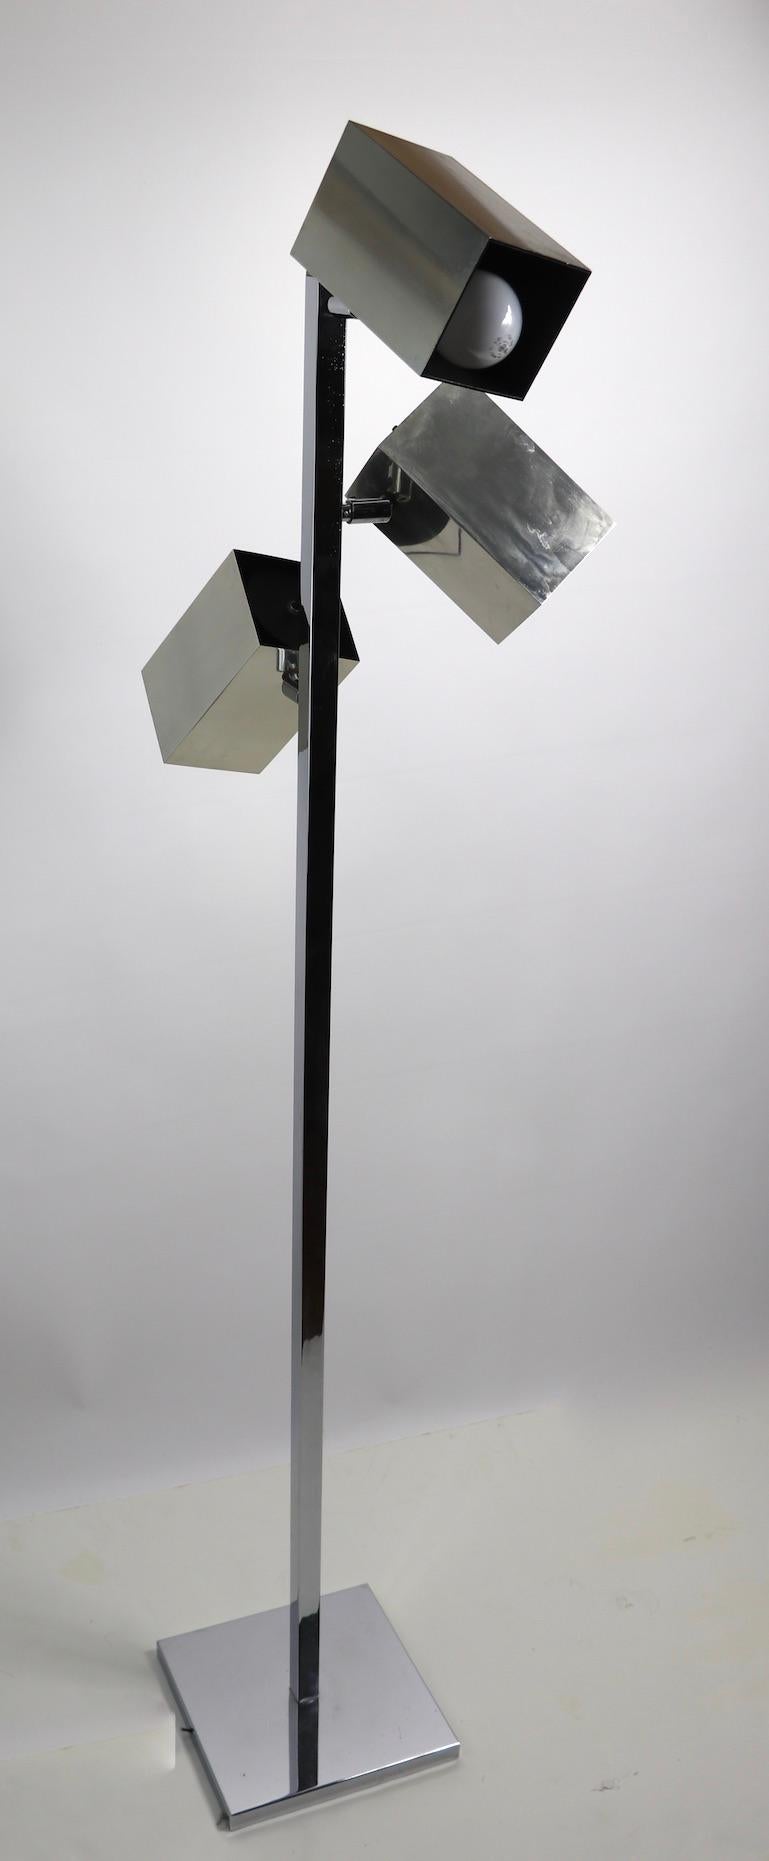 Classic 1970s Koch and Lowy chrome and aluminum three light floor lamp. This example features three independent squared form aluminum hood shades, each shade can swivel and tilt to direct and position of the light, each has its own on/off switch.